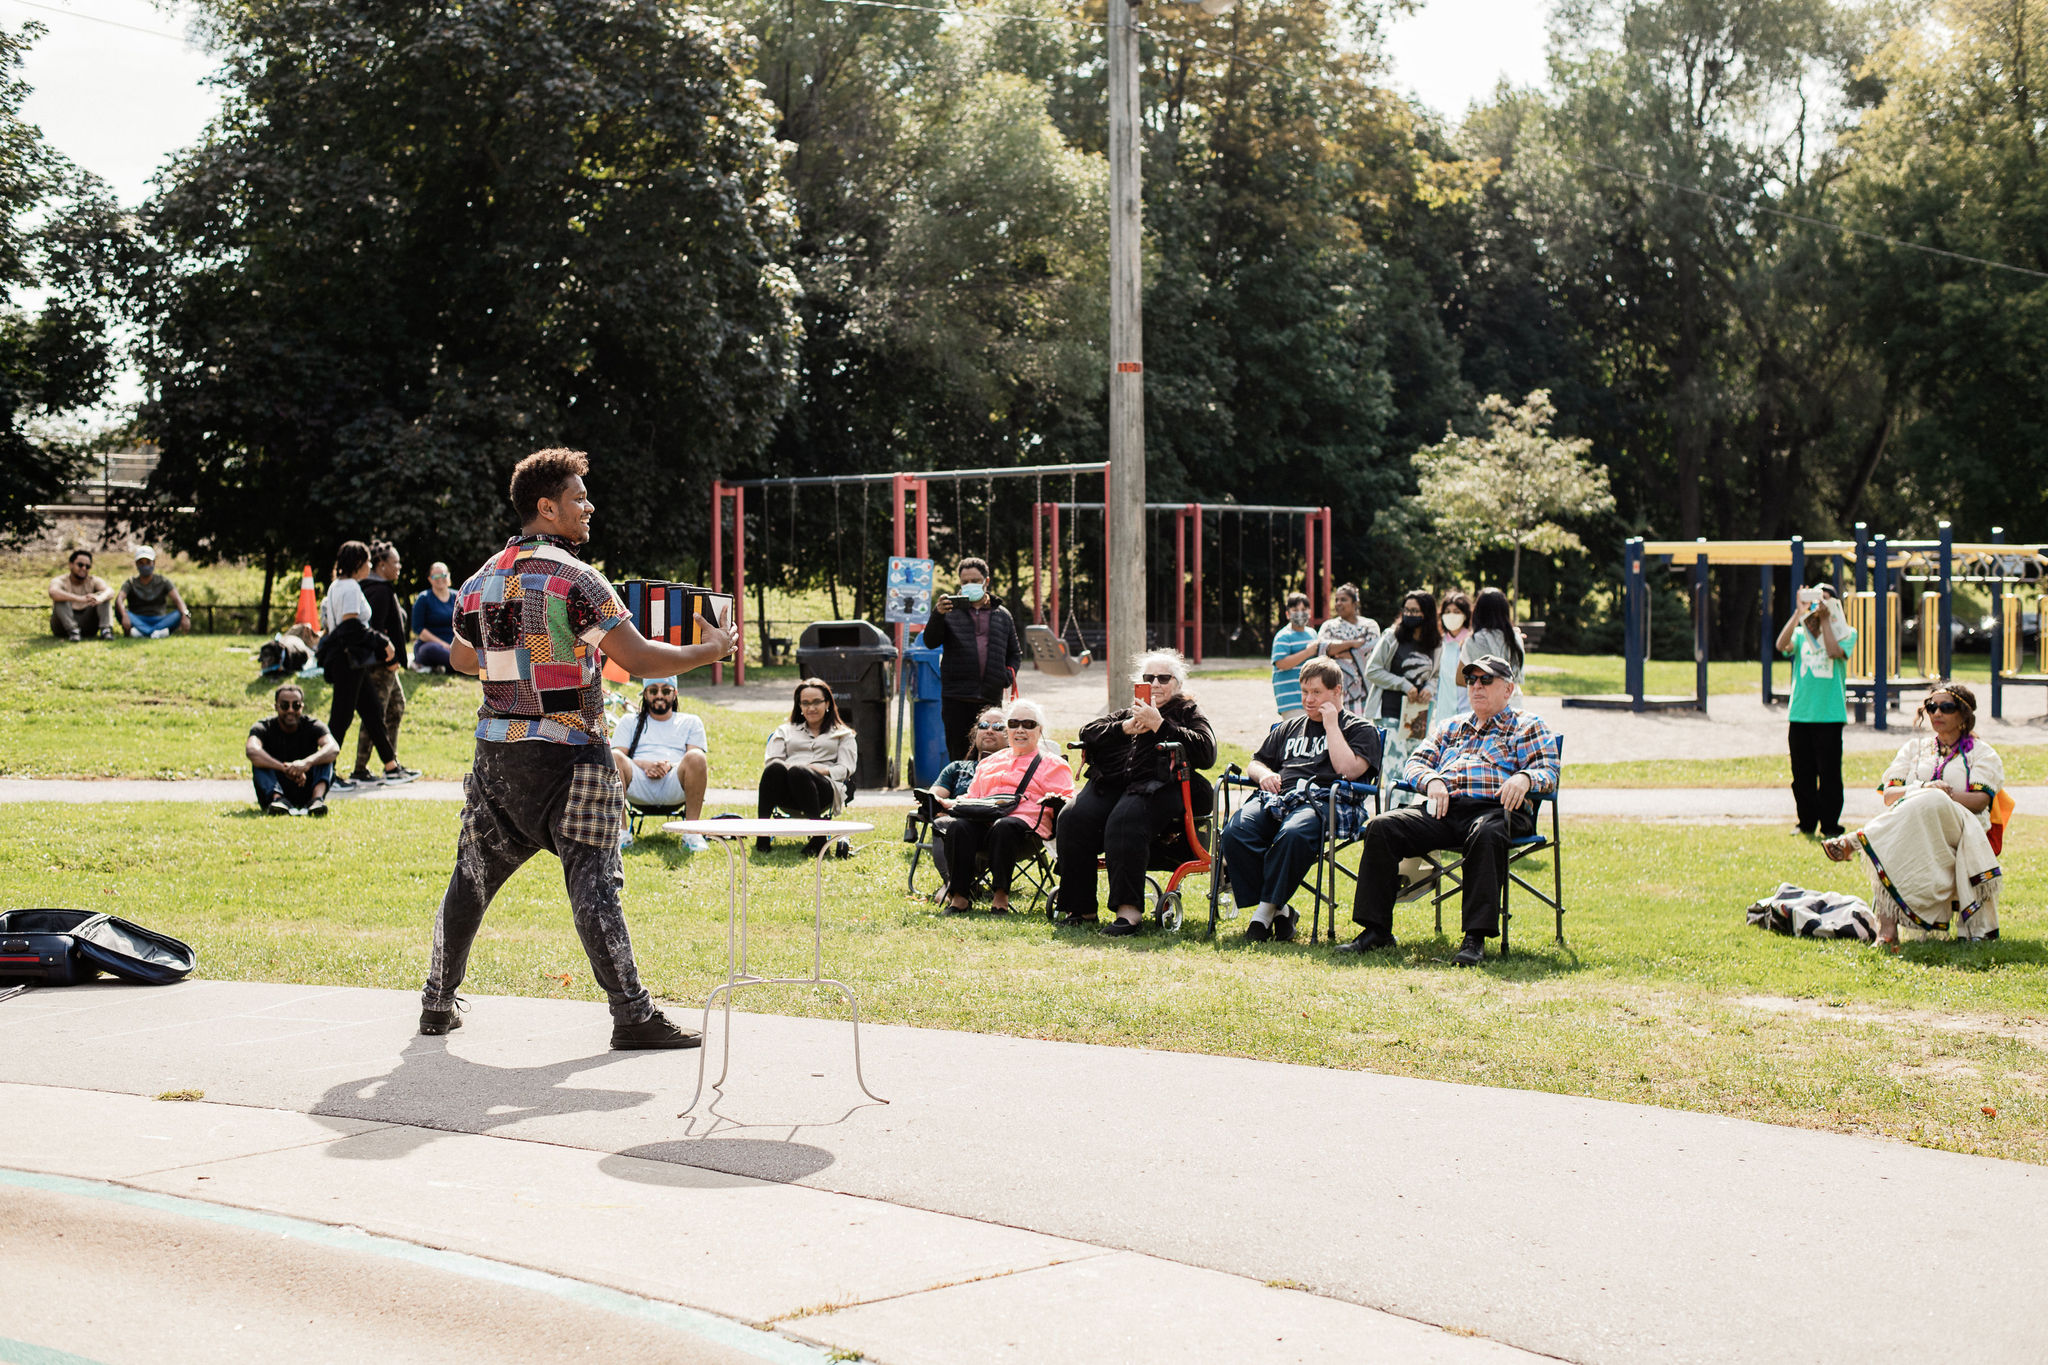 A man stands on the pavement and juggles while audience members watch from the grass.